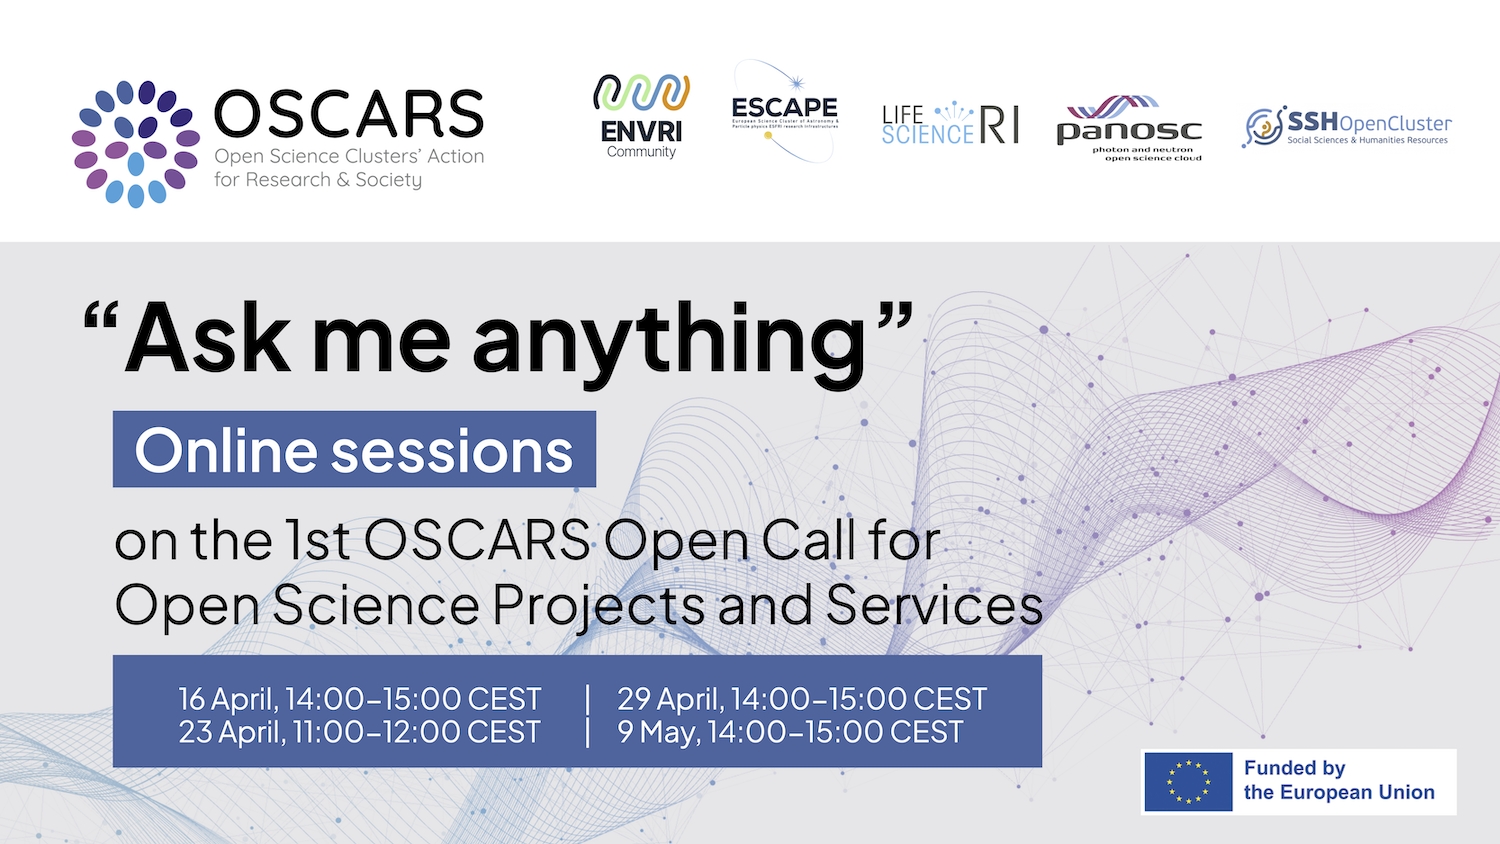 "Ask Me Anything" online sessions on the OSCARS 1st Open Call